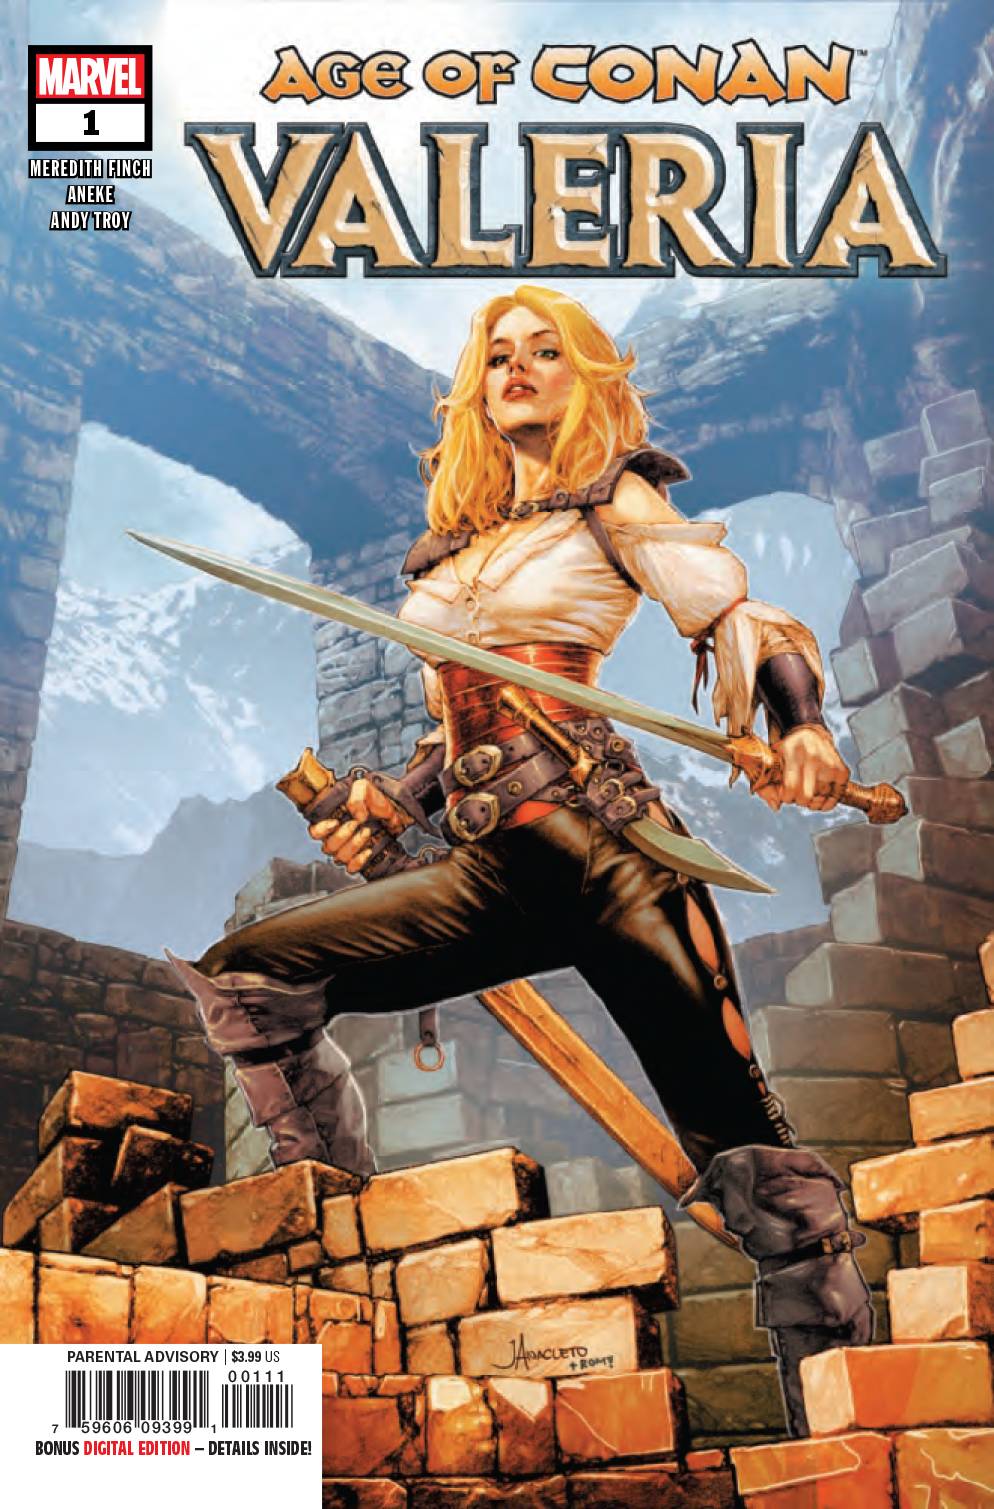 Photo of Age of Conan Valeria Issue 1 (Of 5) comic sold by Stronghold Collectibles